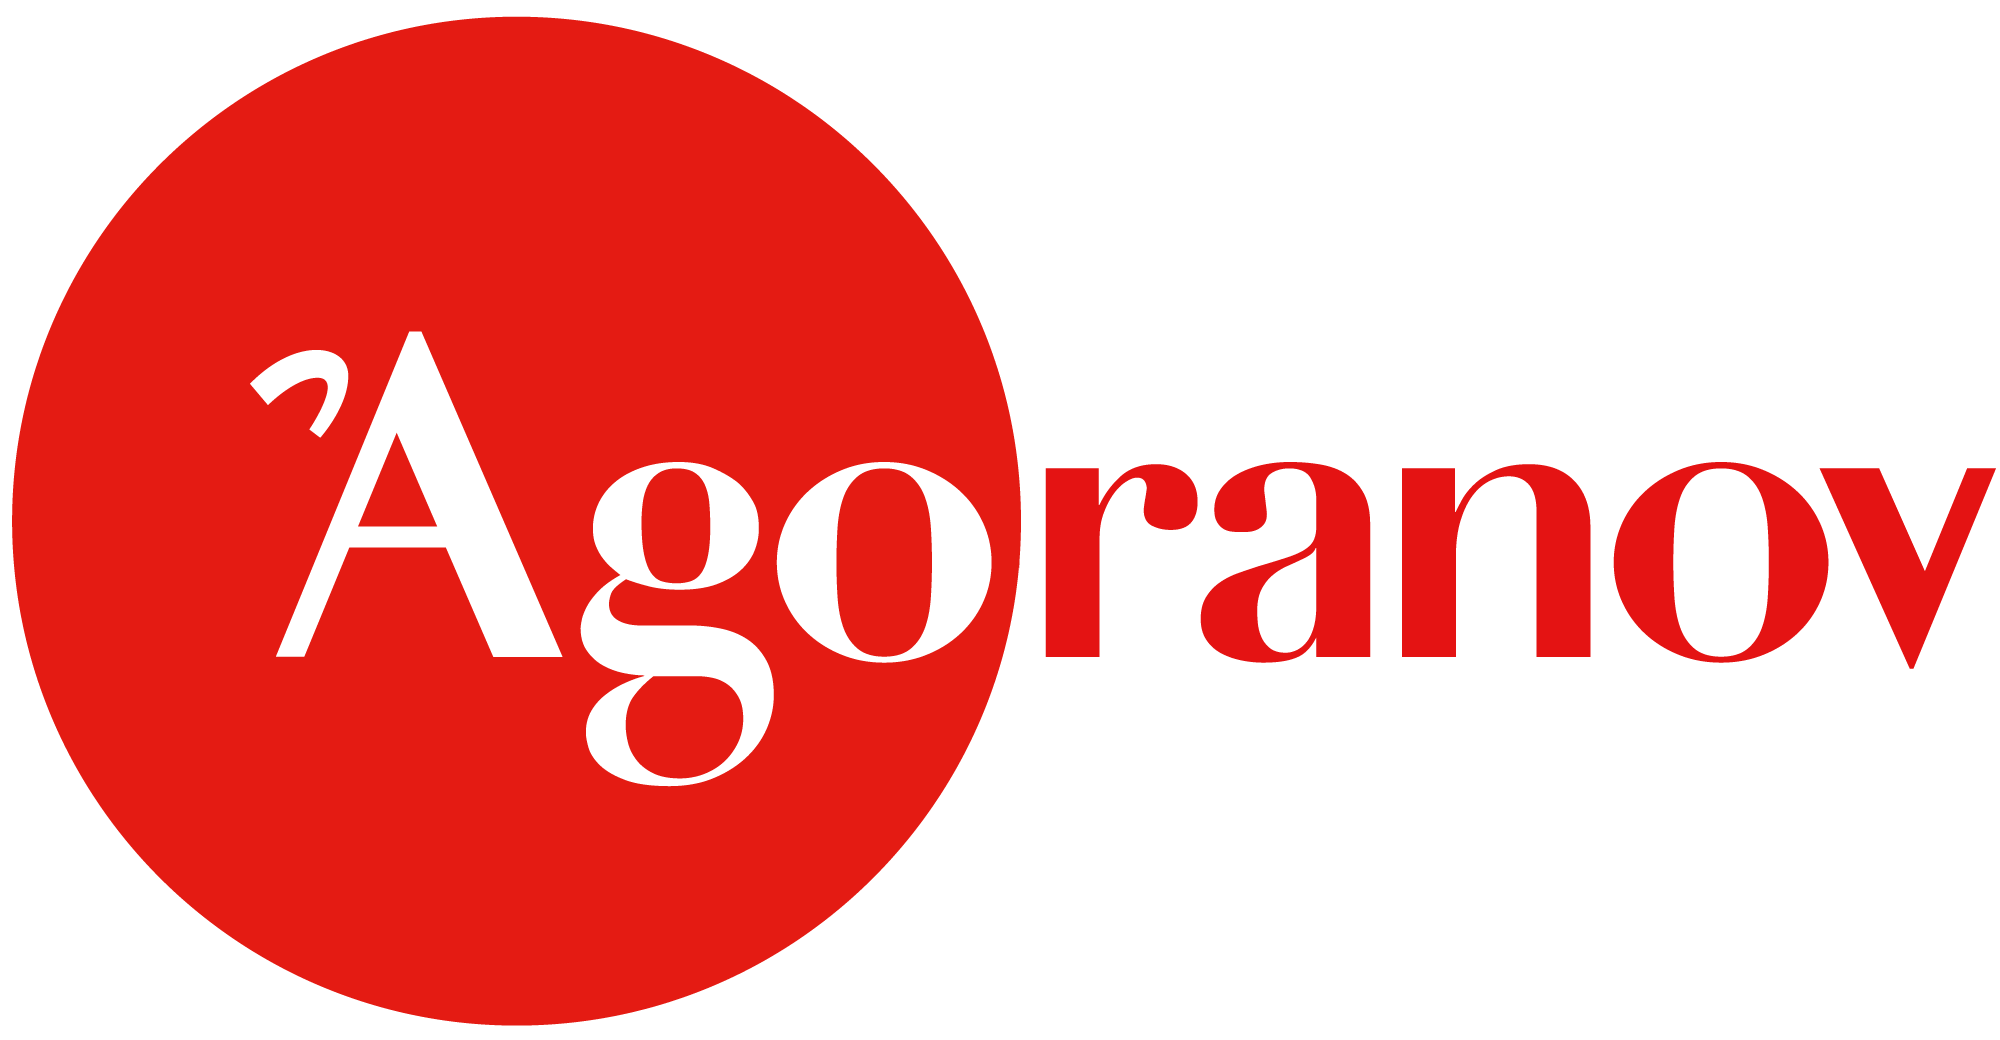 agoranov is focused on technology and science but remains open